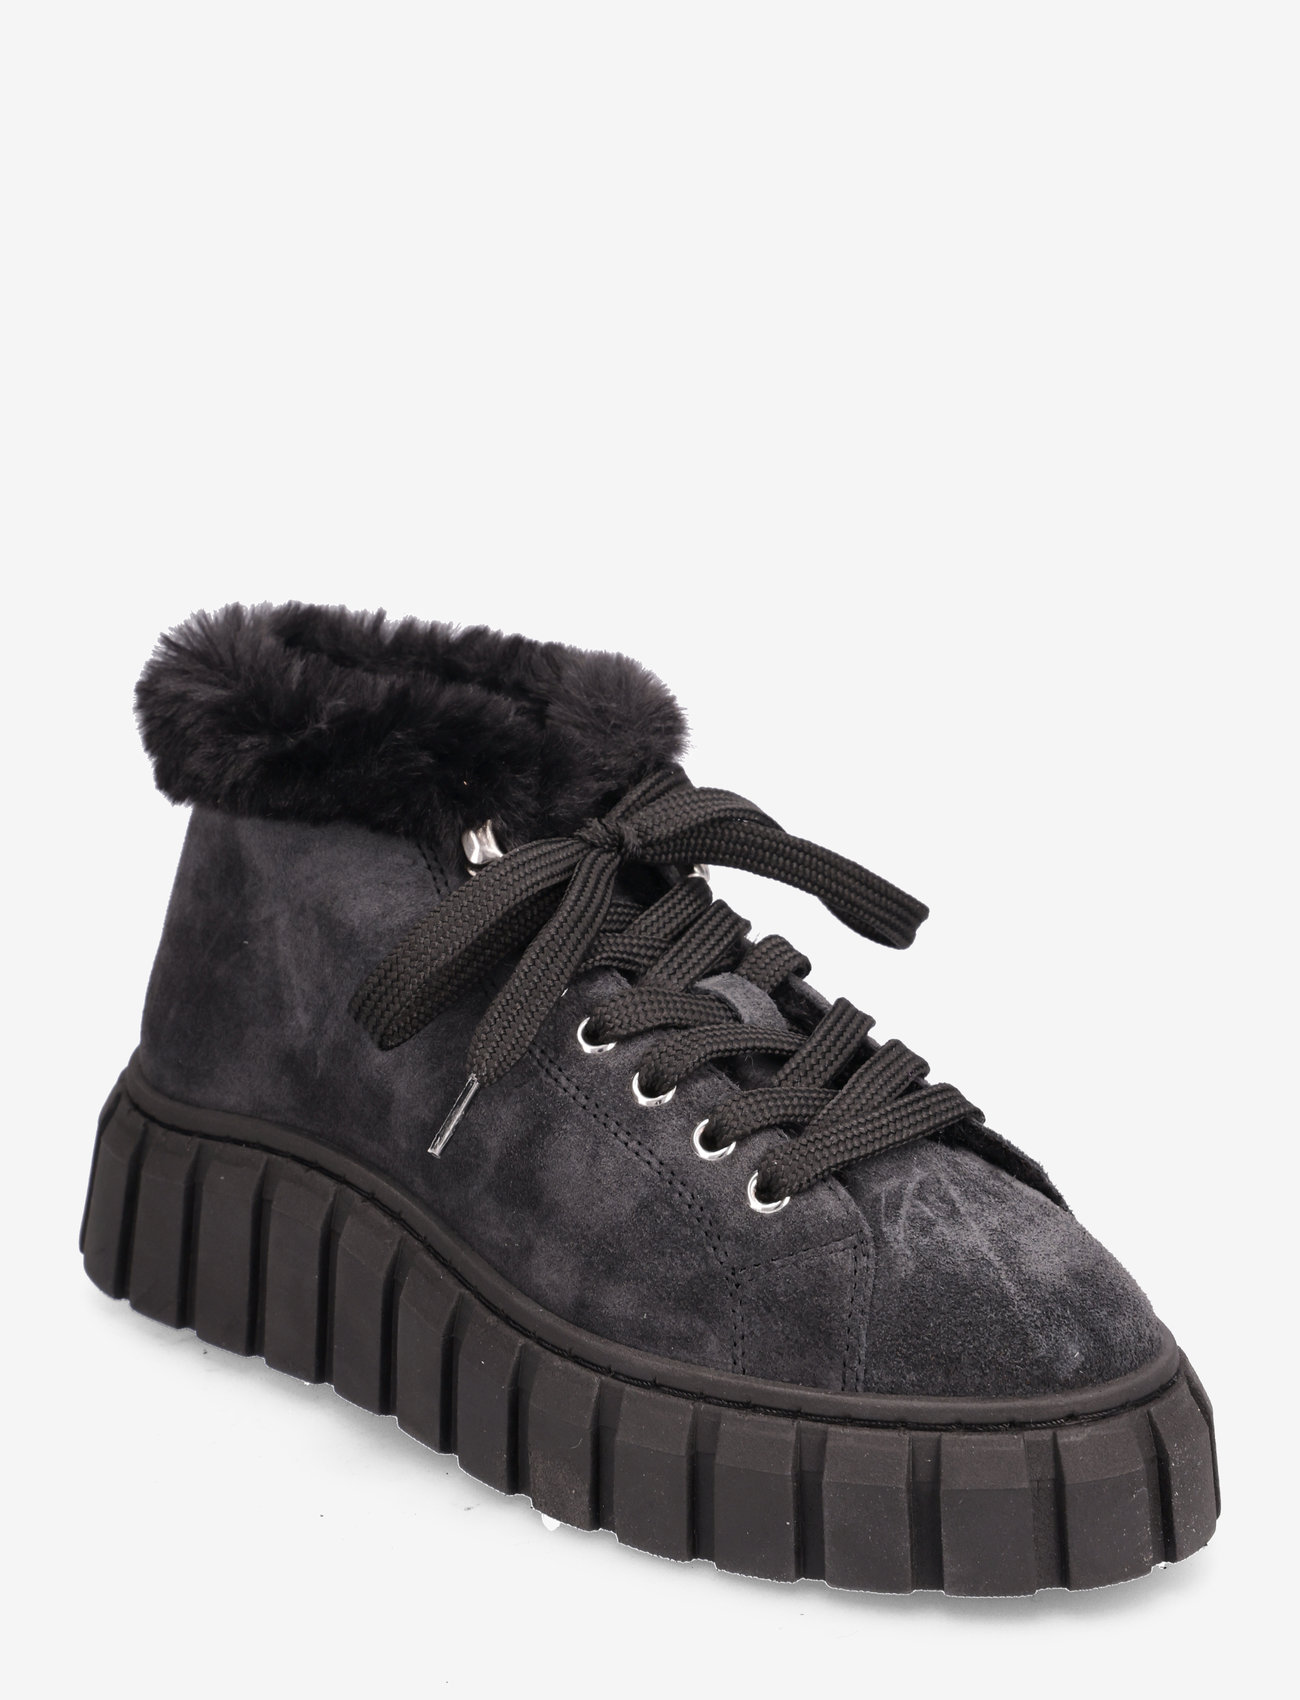 Garment Project - Balo Sneaker Boot - Black/Black Suede - chunky sneakers - black - 0